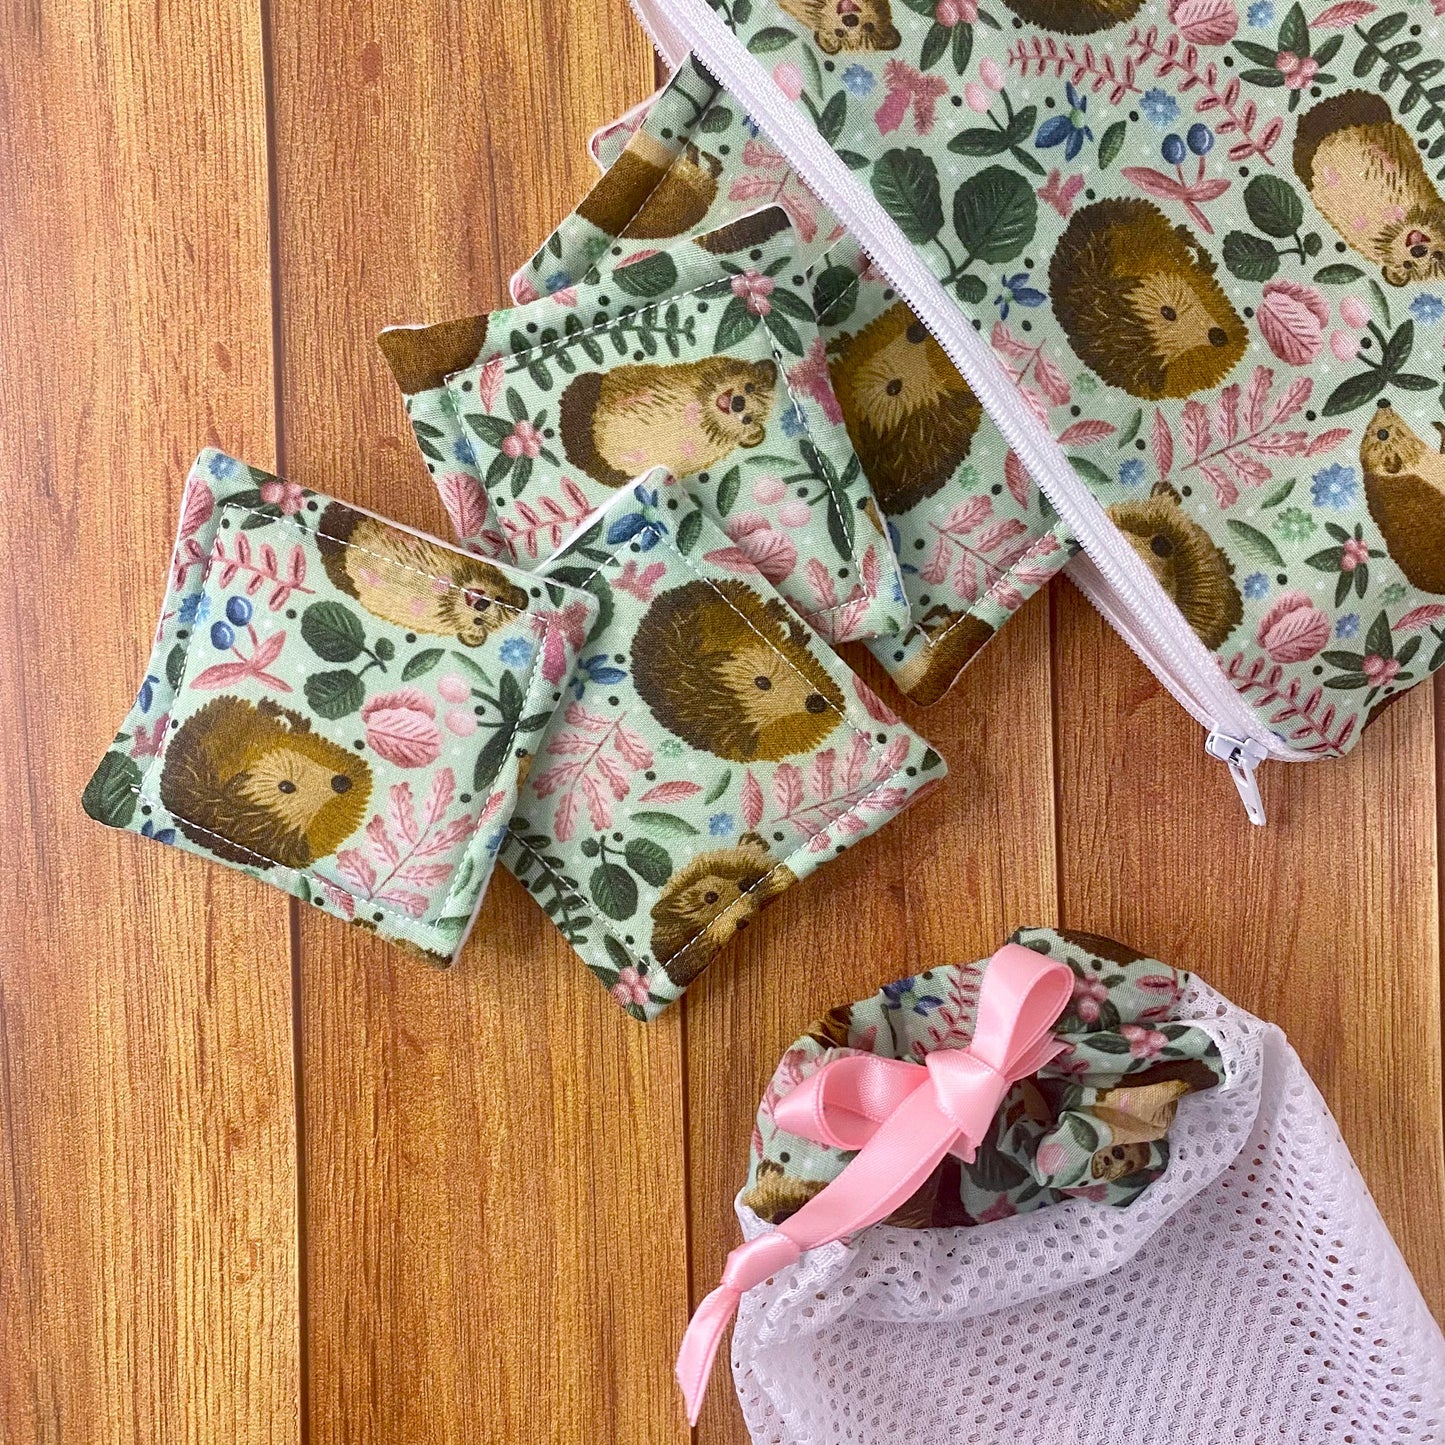 hedgehog patterned reusable skincare pads spilling out of a hedgehog patterned pouch and a matching washbag nearby on wooden surface